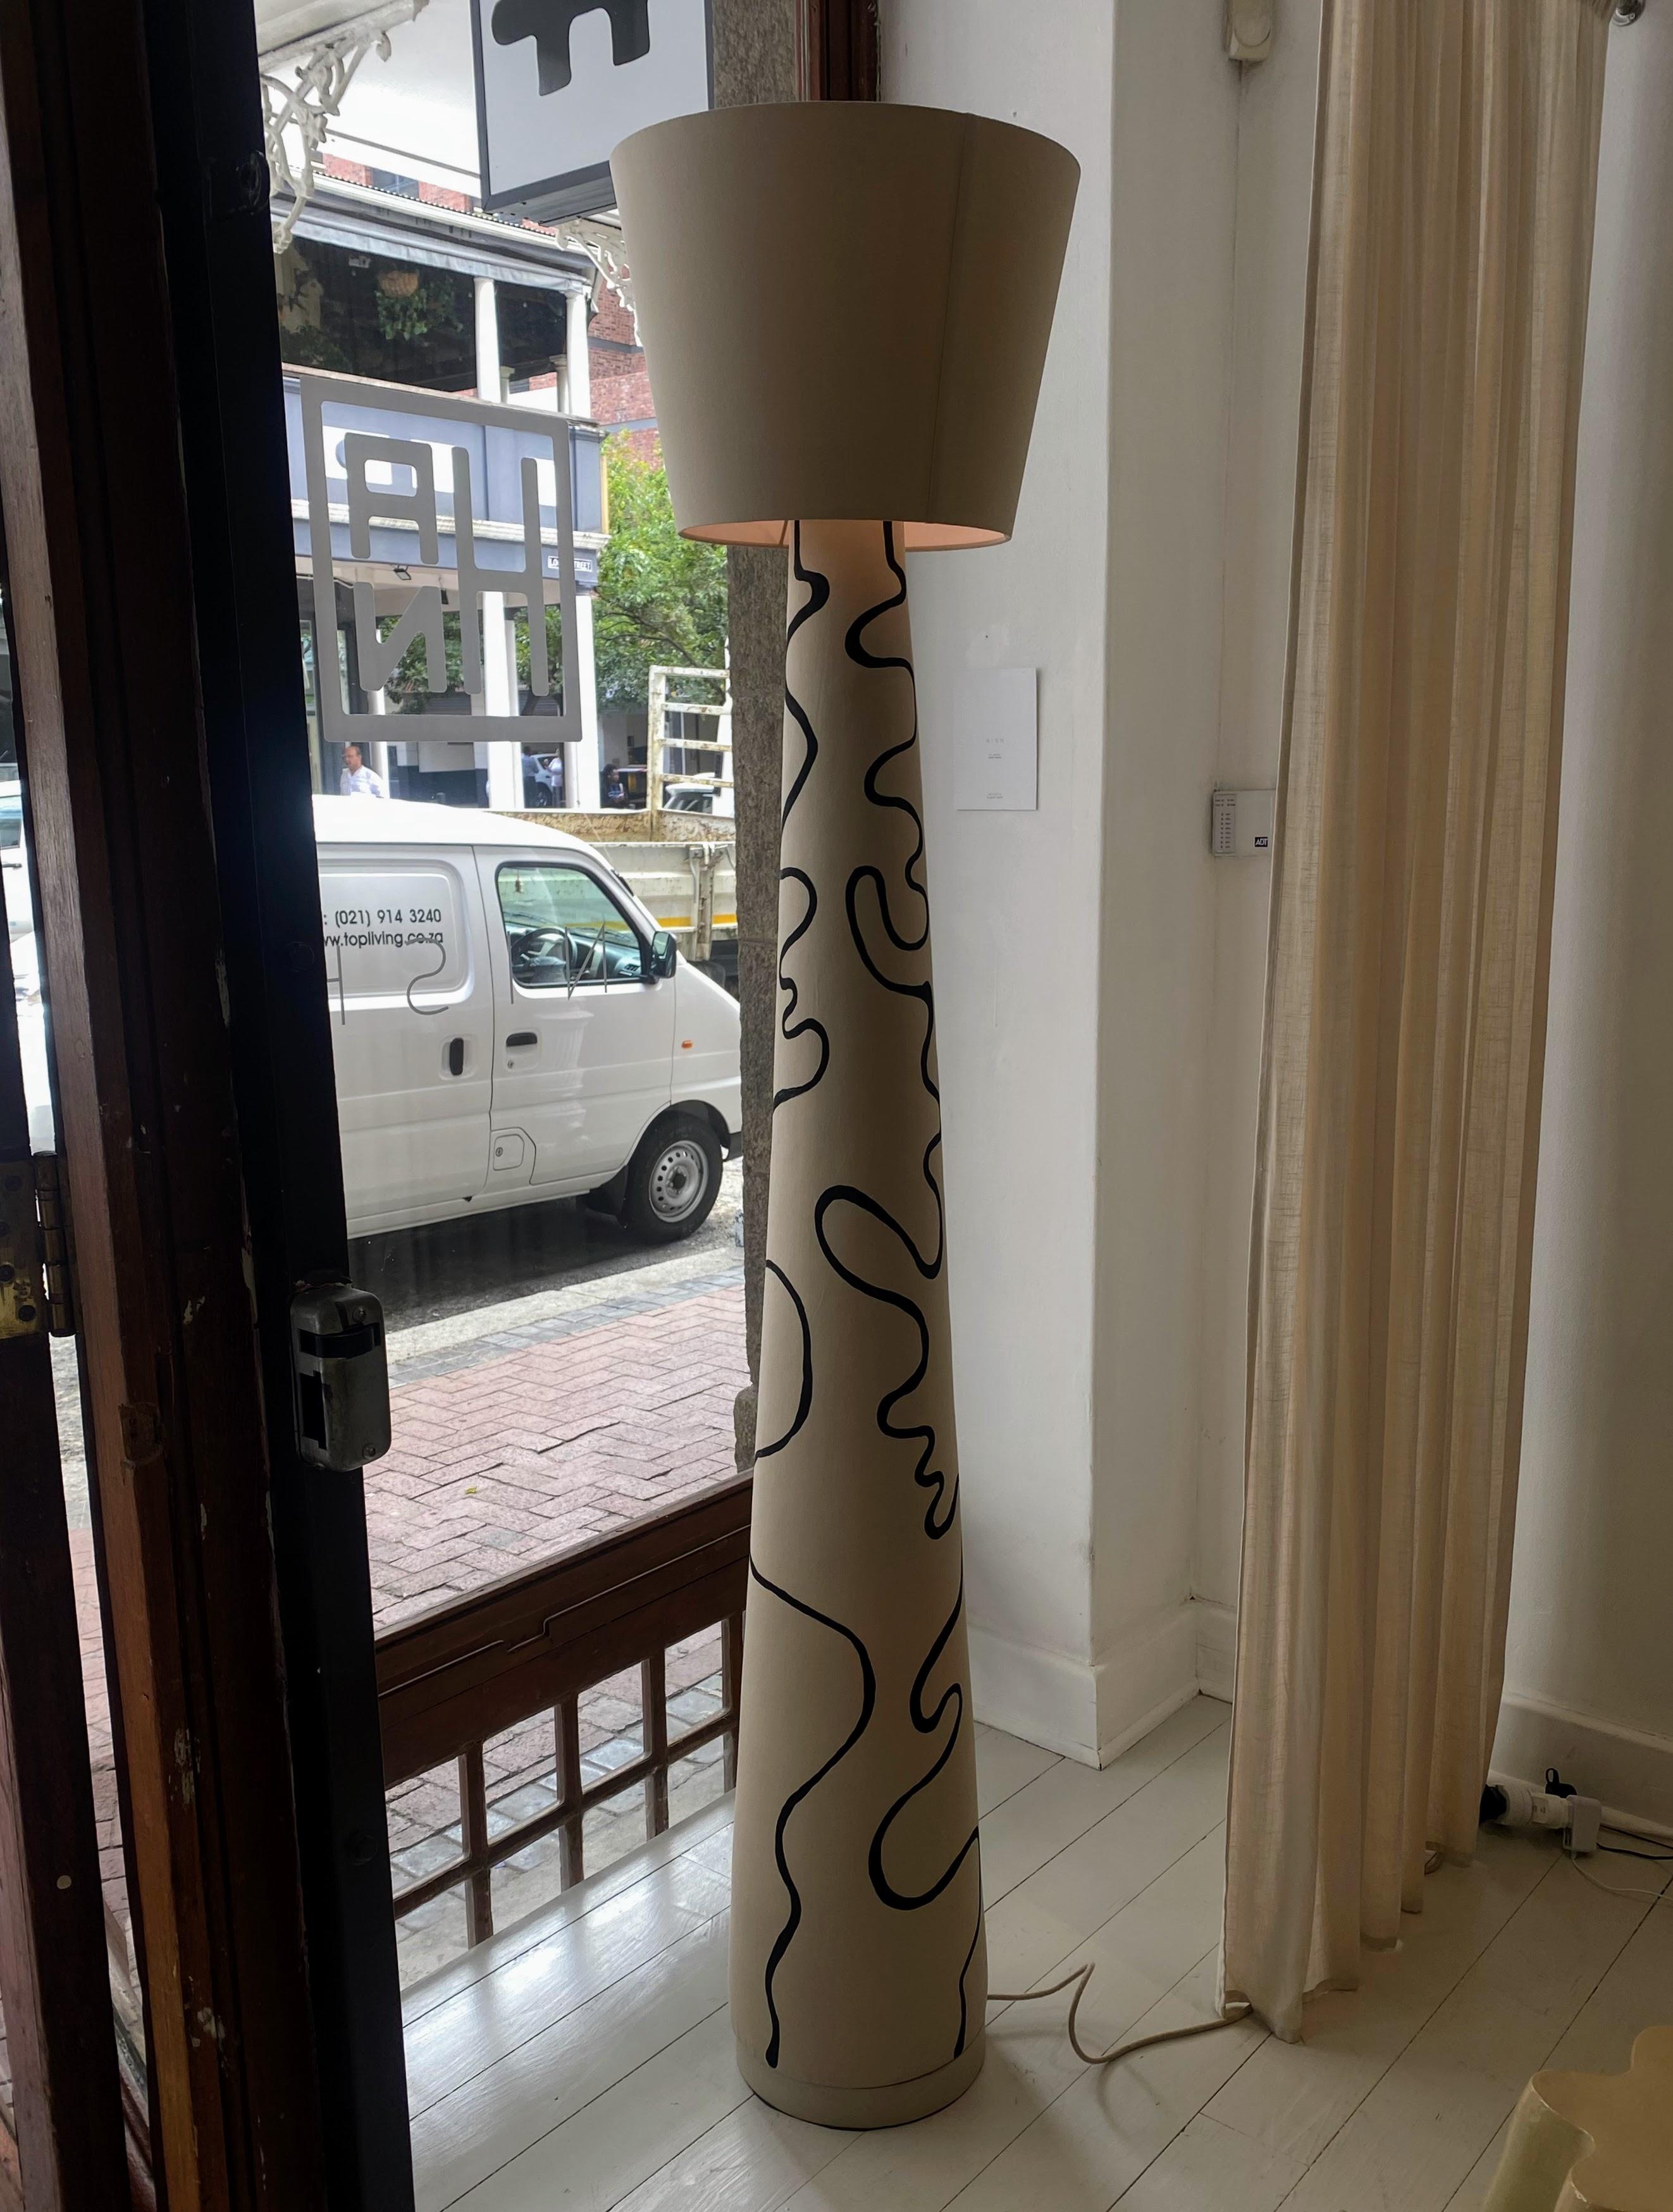 Wendy Floor Lamp by Nish Studio
Dimensions: ⌀ 47 x H 210 cm
Materials: Fabric


N I S H is a Cape Town based Fashion and Furniture design studio. N I S H creates contemporary, elegant and progressive designs that salute the contradiction between